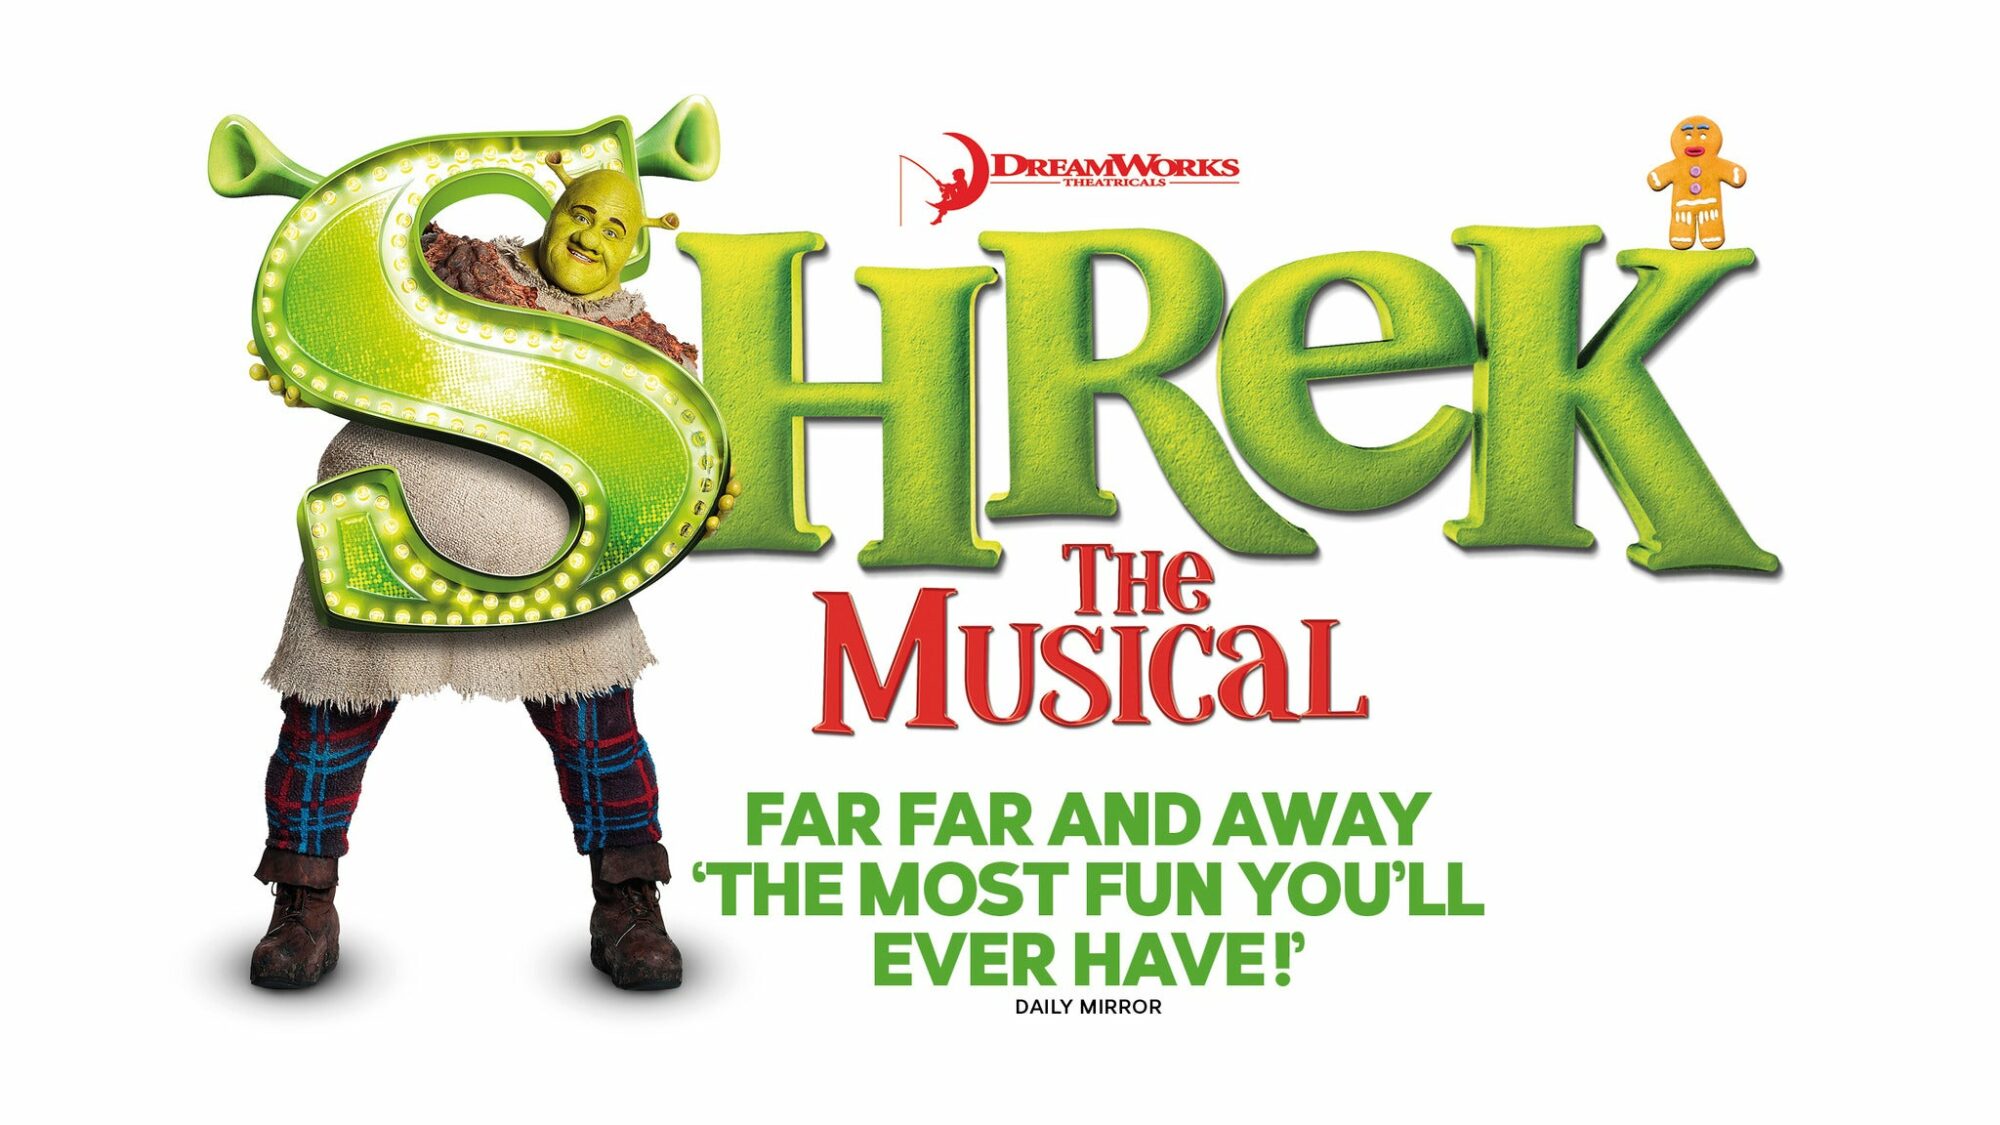 Image name Shrek The Musical JR at Whitby Pavilion Theatre Whitby the 19 image from the post Shrek: The Musical JR at Whitby Pavilion Theatre, Whitby in Yorkshire.com.